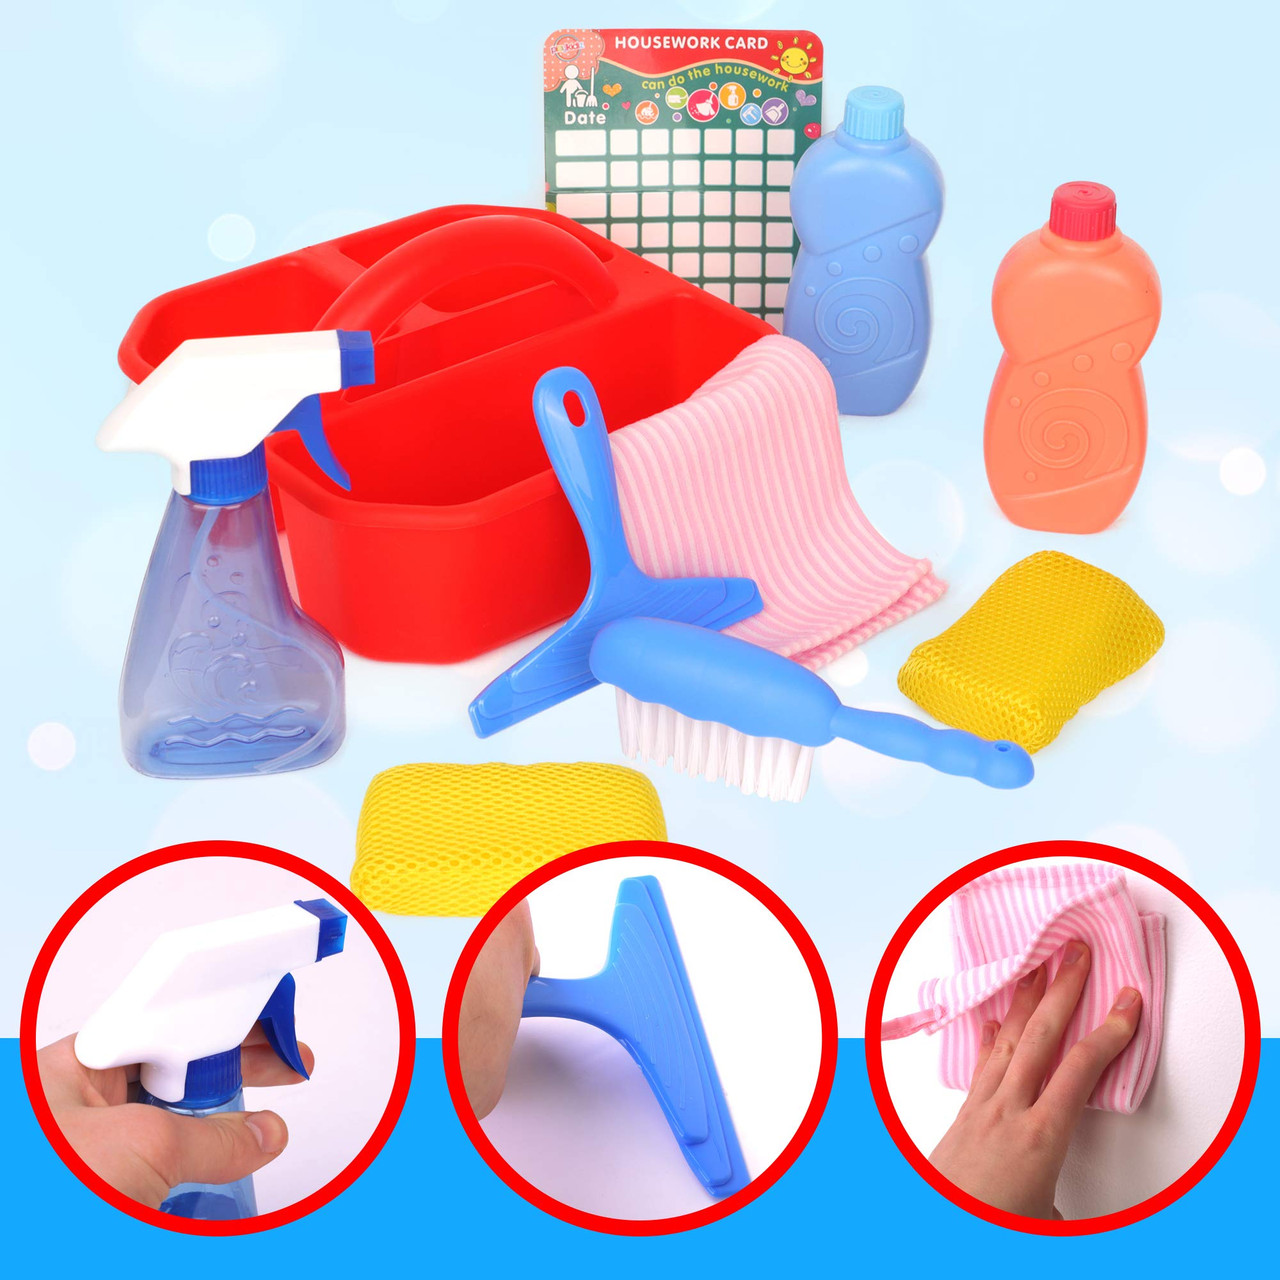 Playkidiz Kids Cleaning Set for Toddlers, Toy Broom & Mop Cleaning  Accessory Set, Pretend Play Toys for Boys & Girls Ages 3+